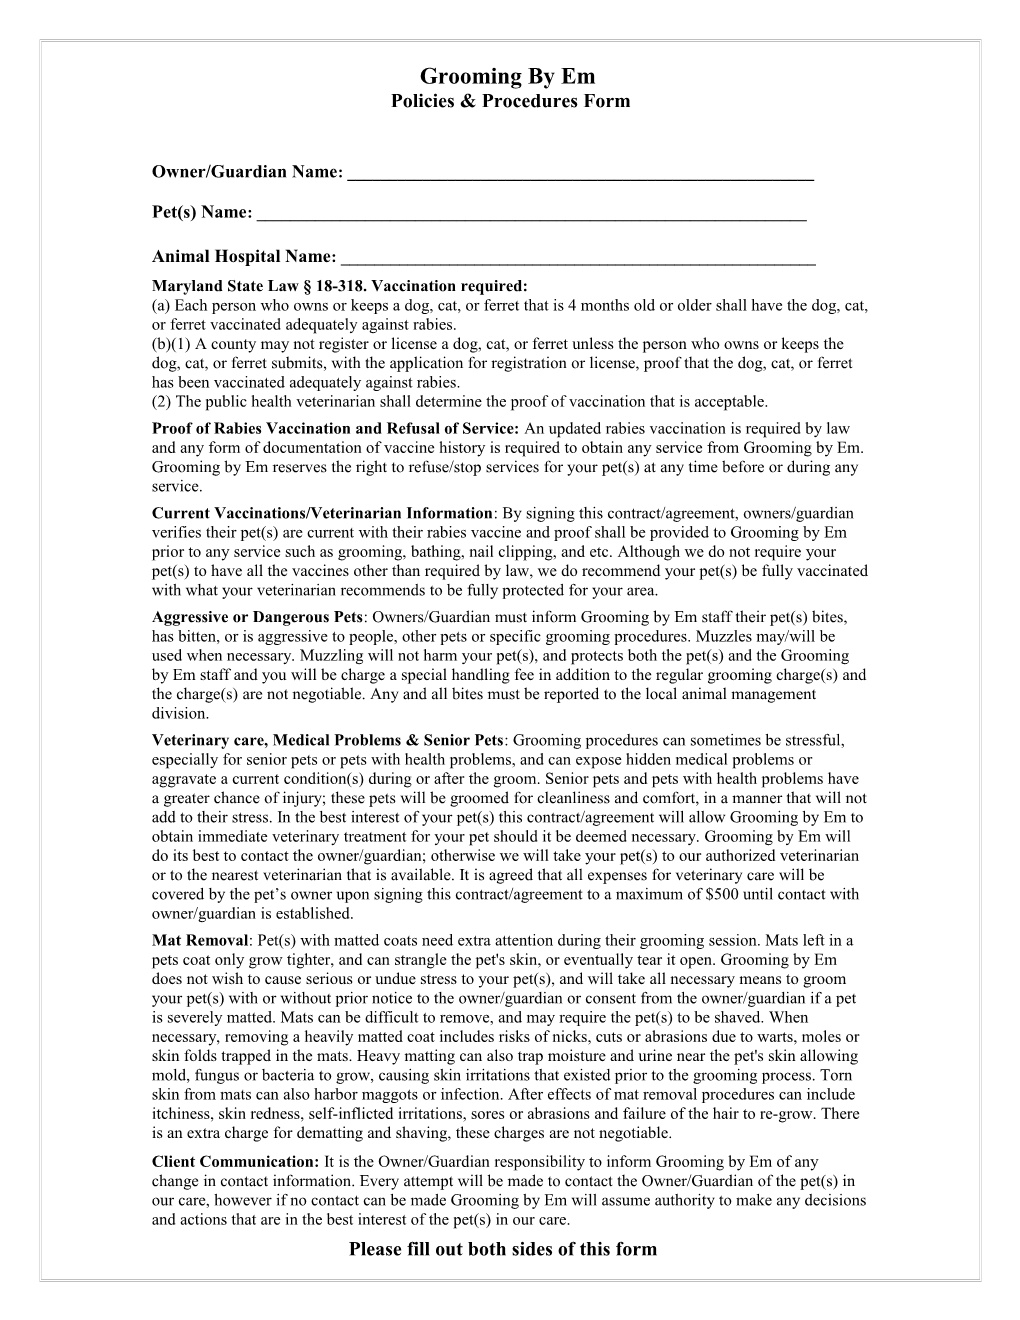 Grooming Release Form